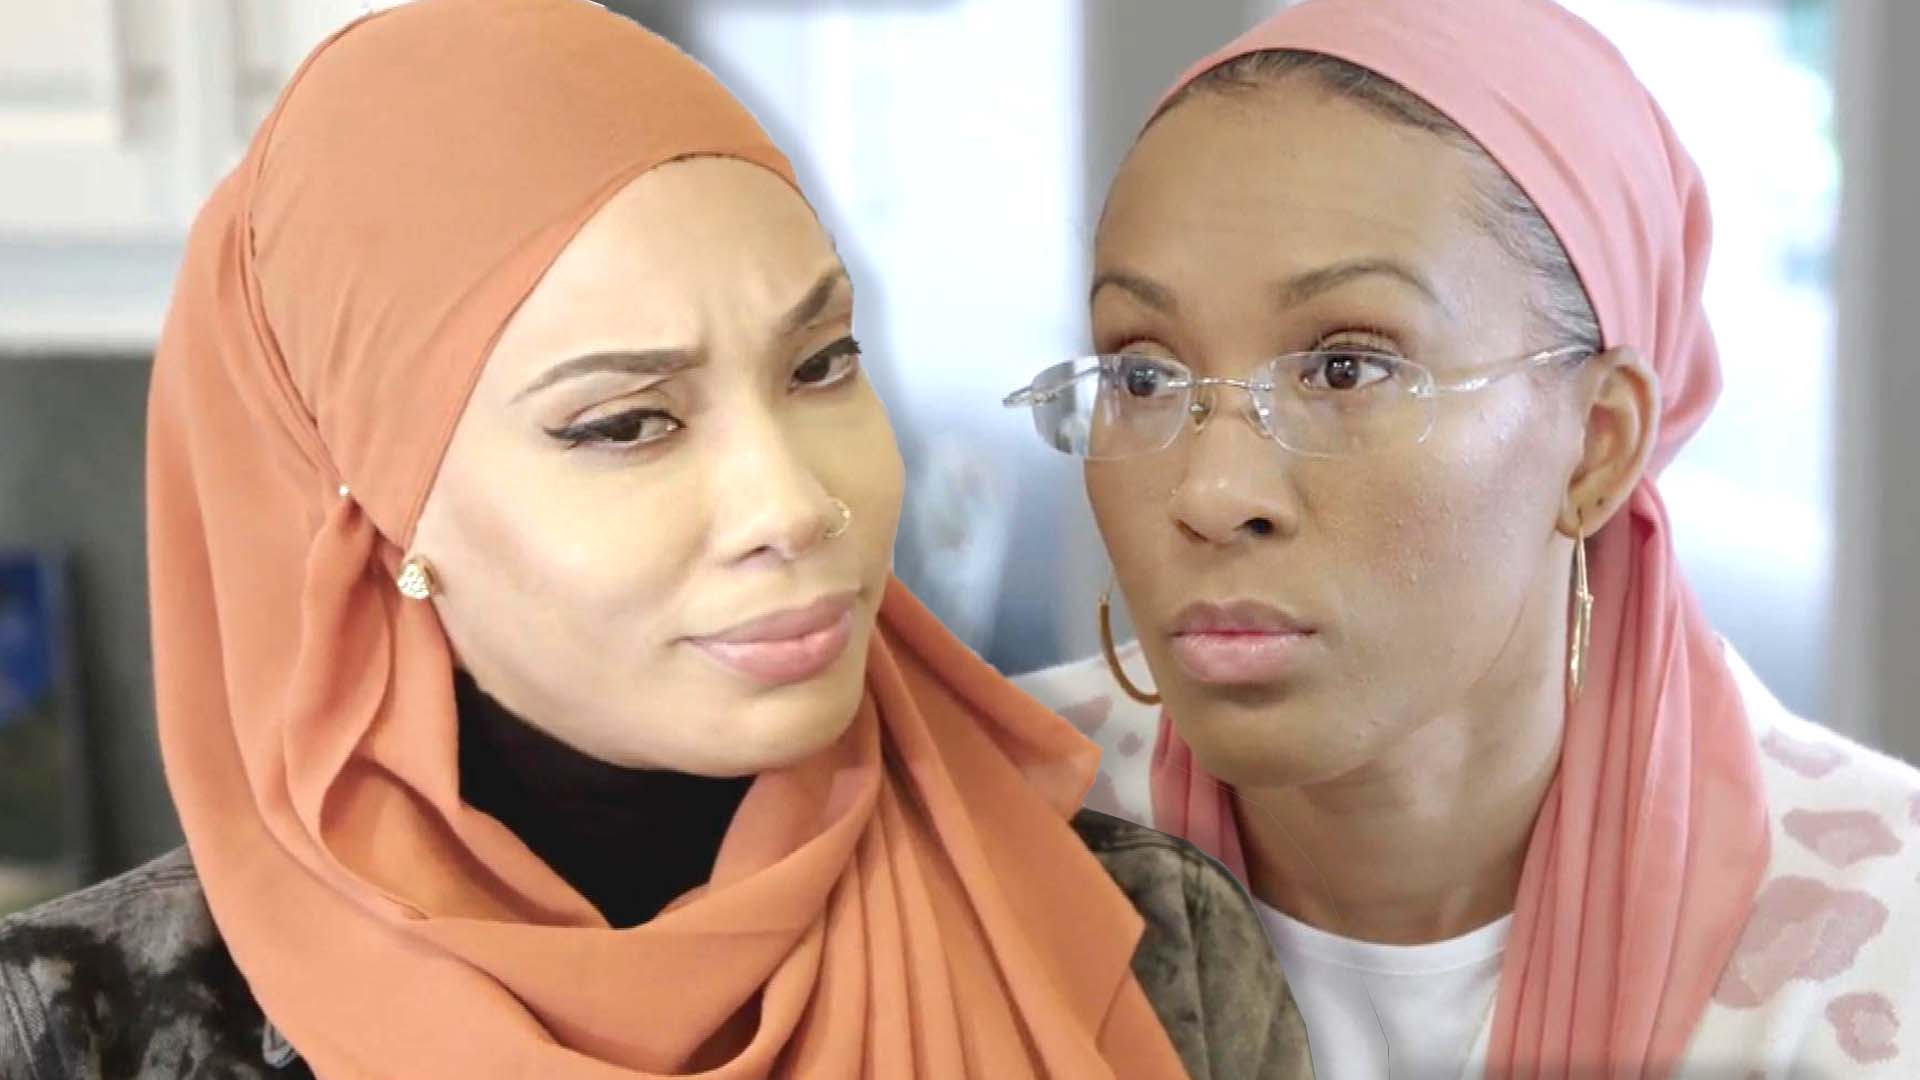 '90 Day Fiancé’: Shaeeda and Bilal’s Ex-Wife Have a Tense Conversation About a Prenup